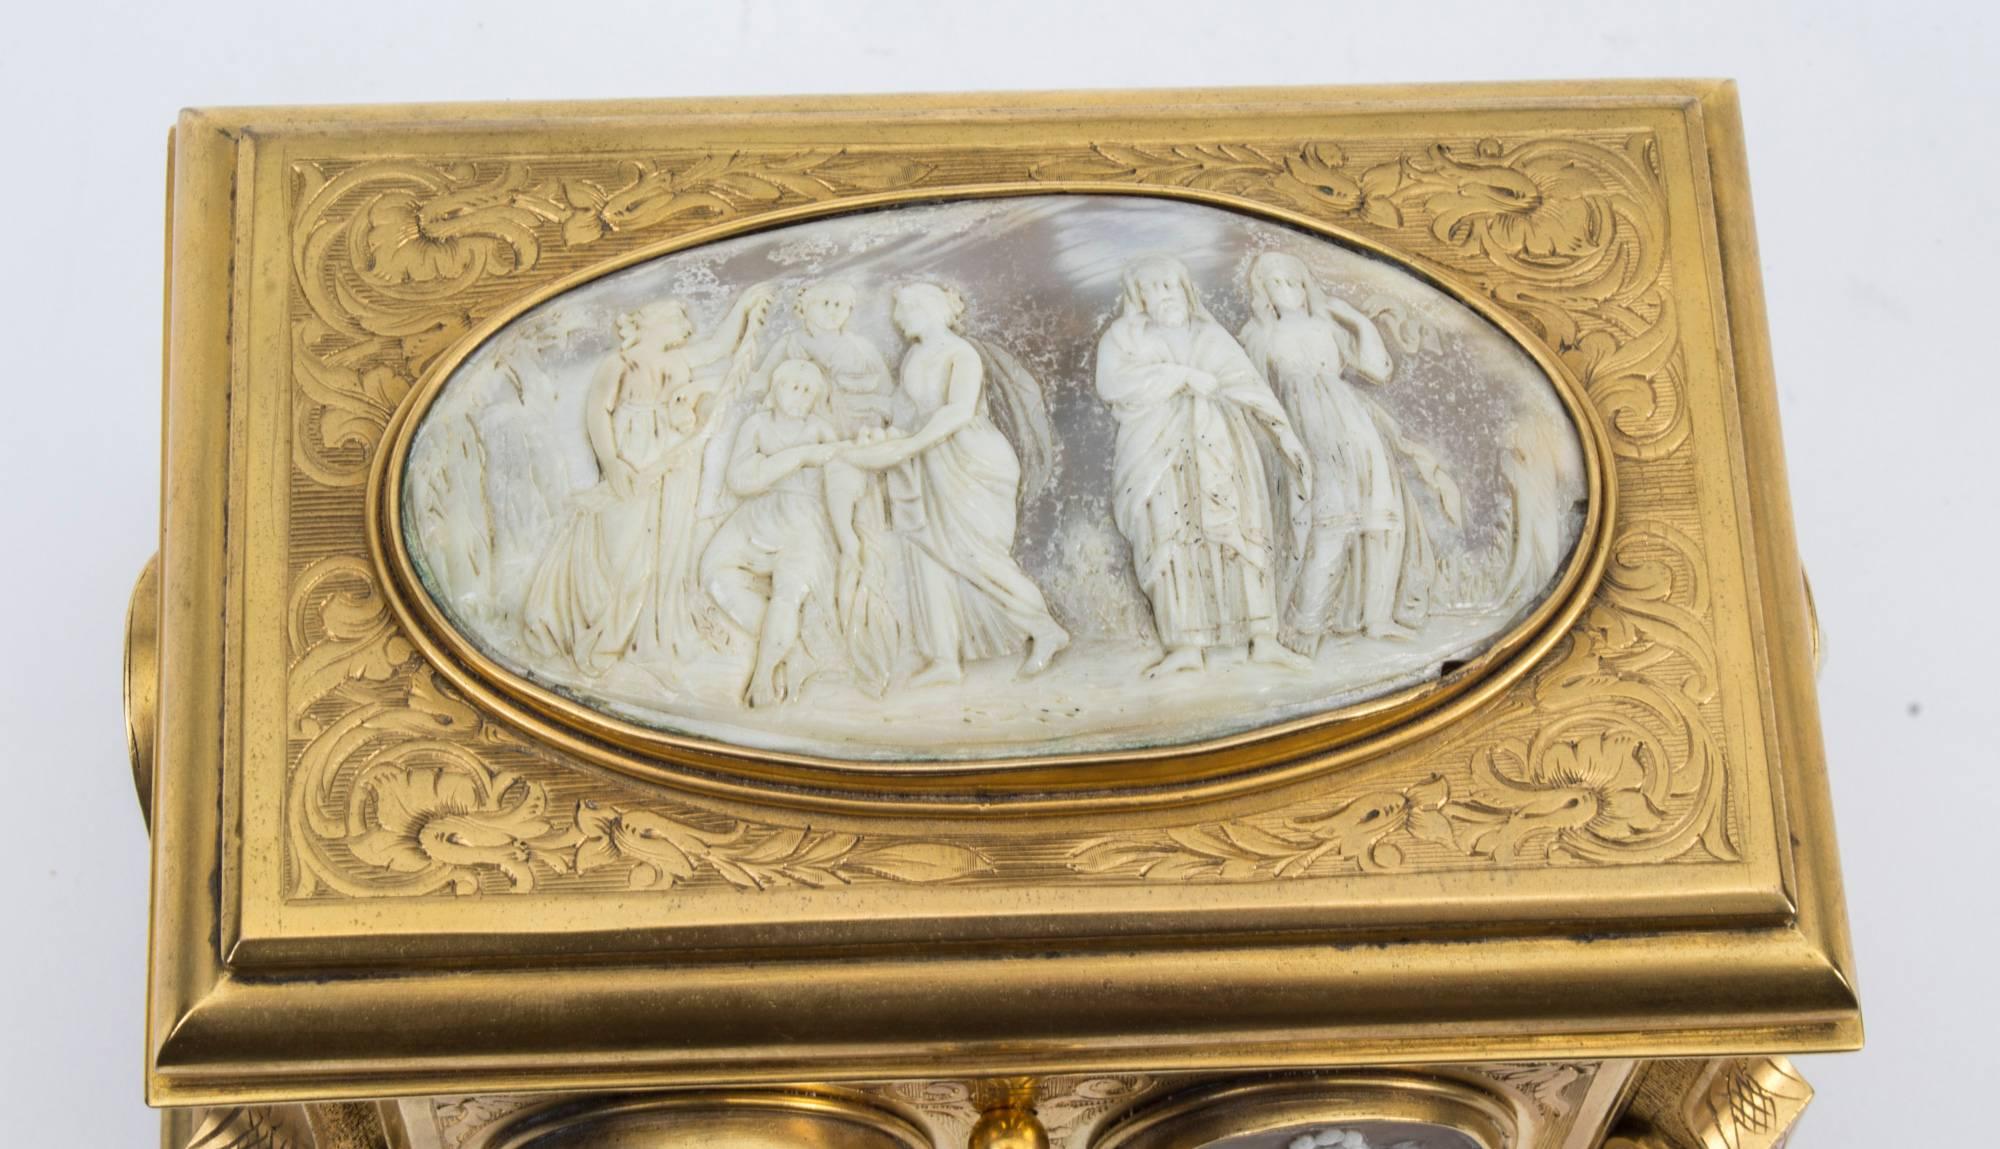 This is a wonderful antique French ormolu and carved cameo shell mounted jewelry casket, retailed by the renowned master cabinet maker, Tahan of Paris, and circa 1870 in date.

Of rectangular form, the hinged lid and sides are inset with